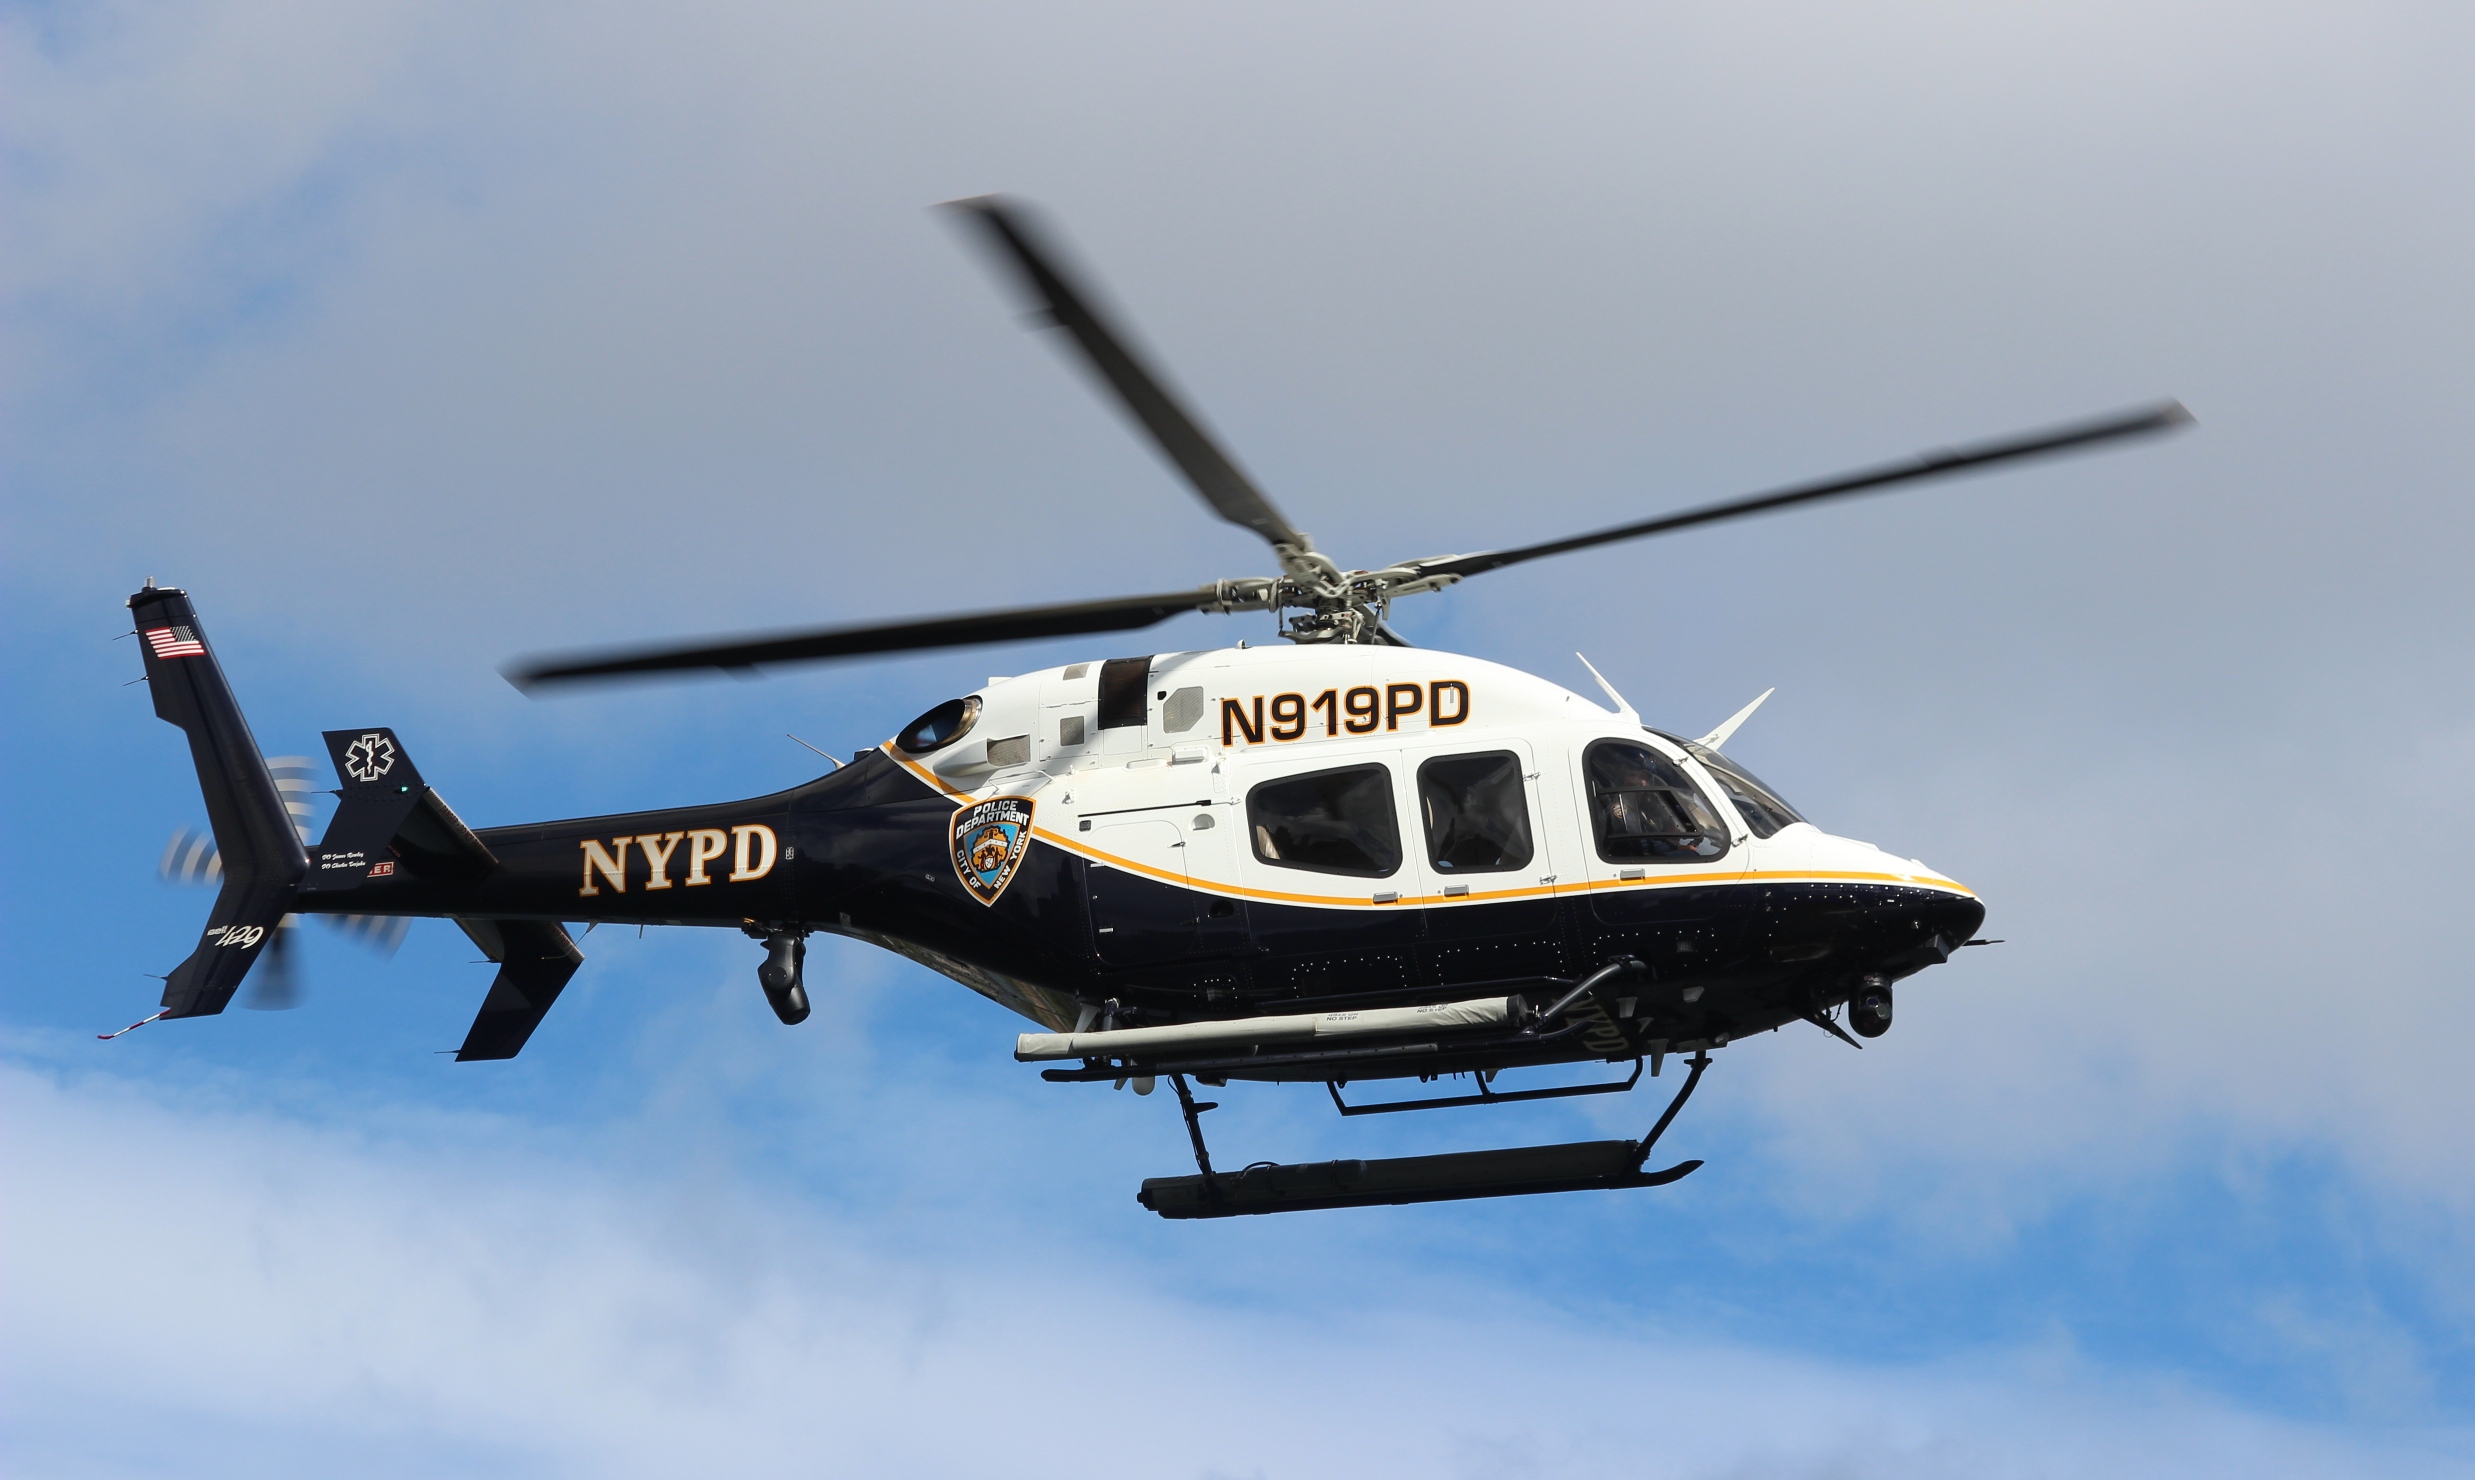 Making an Informed Decision: Recommendations for Potential Helicopter Owners